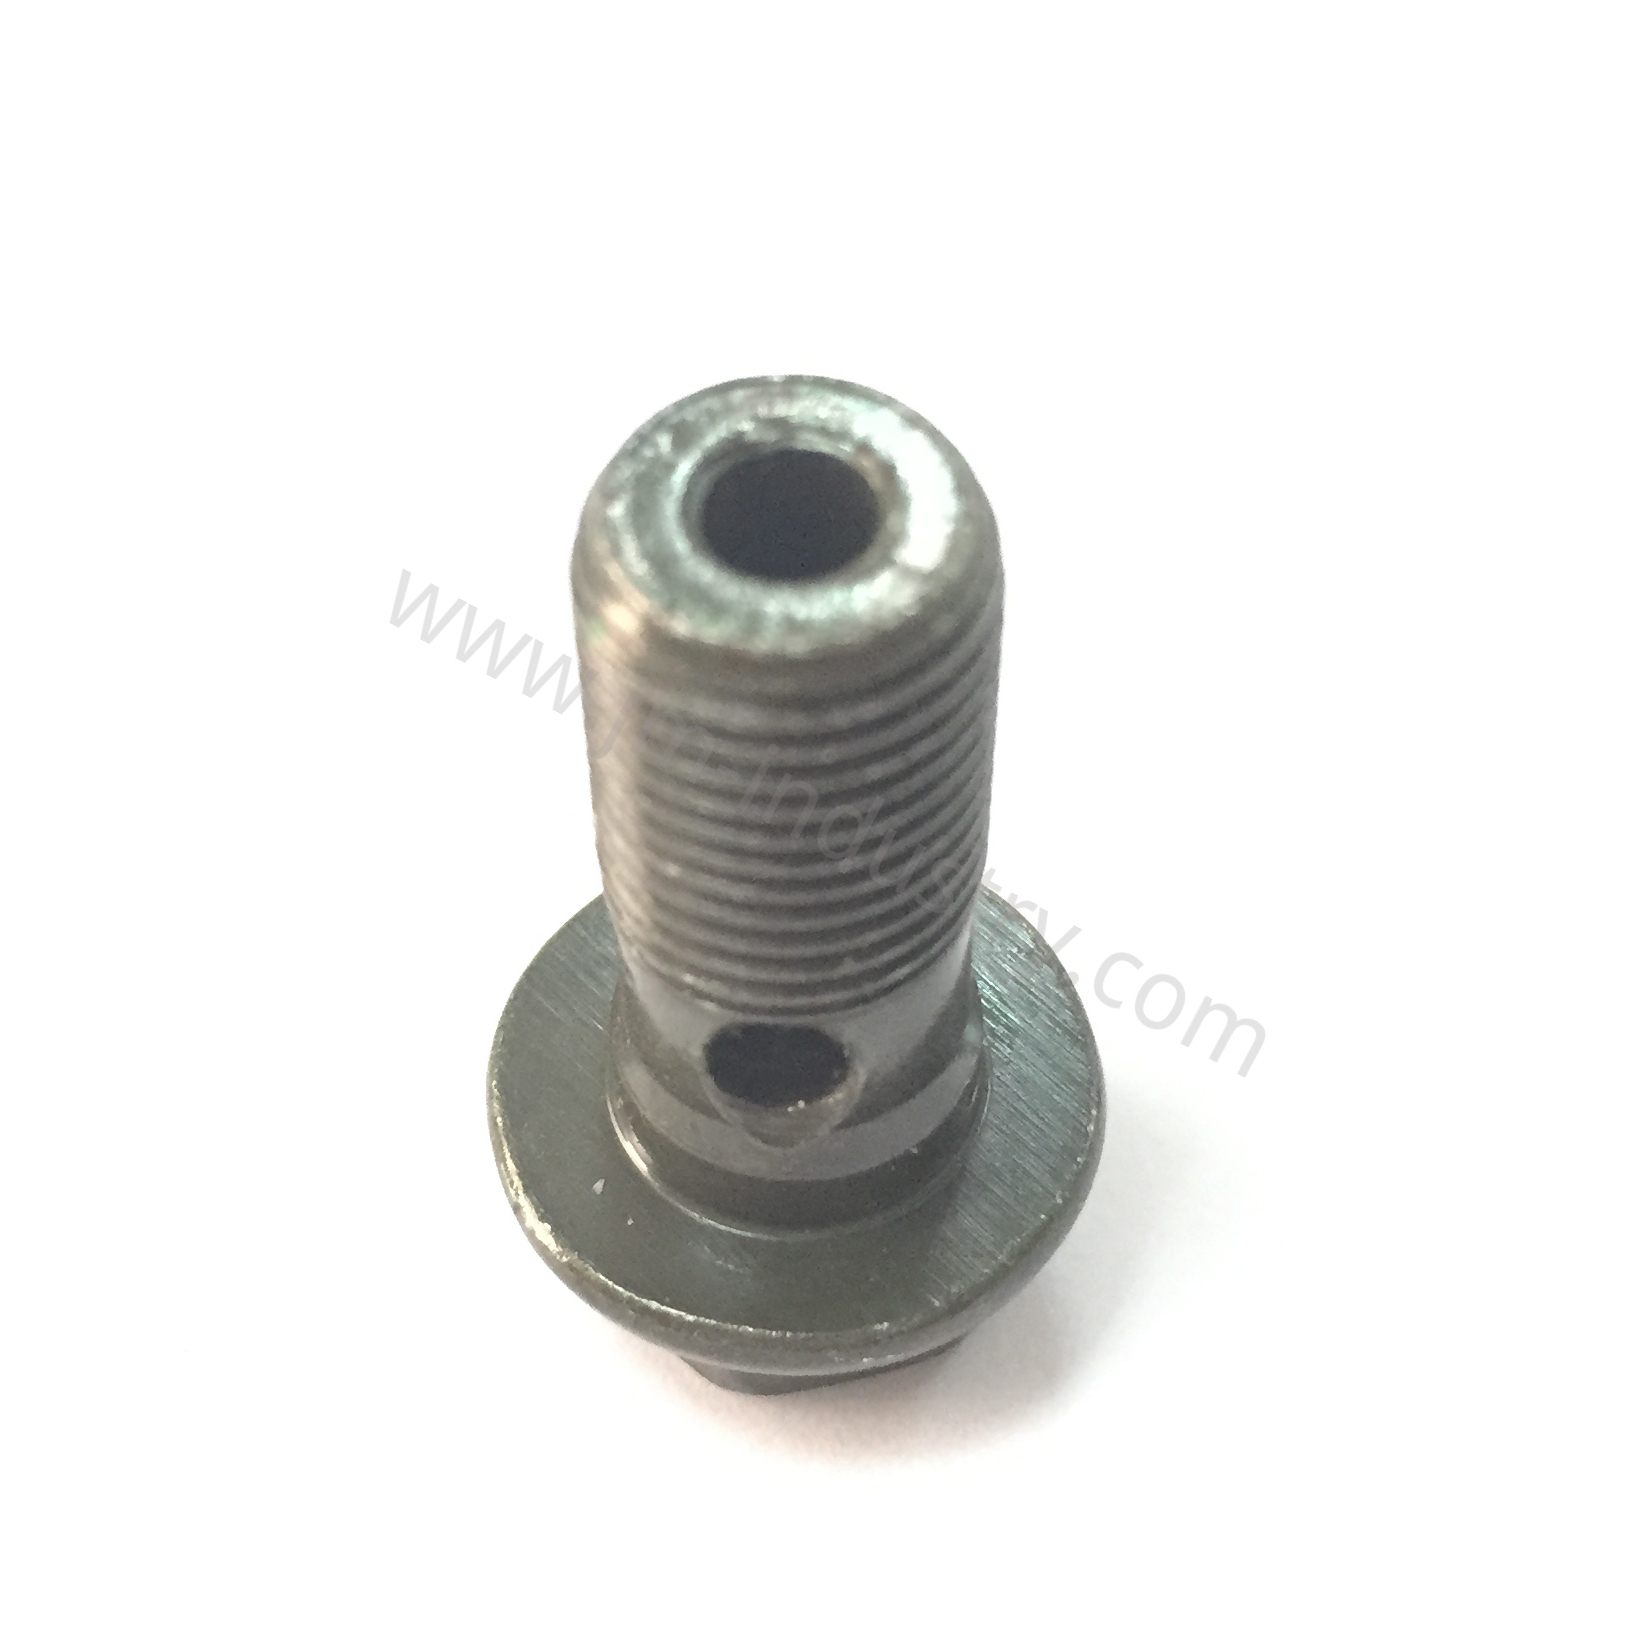 Hex flange bolt with hole